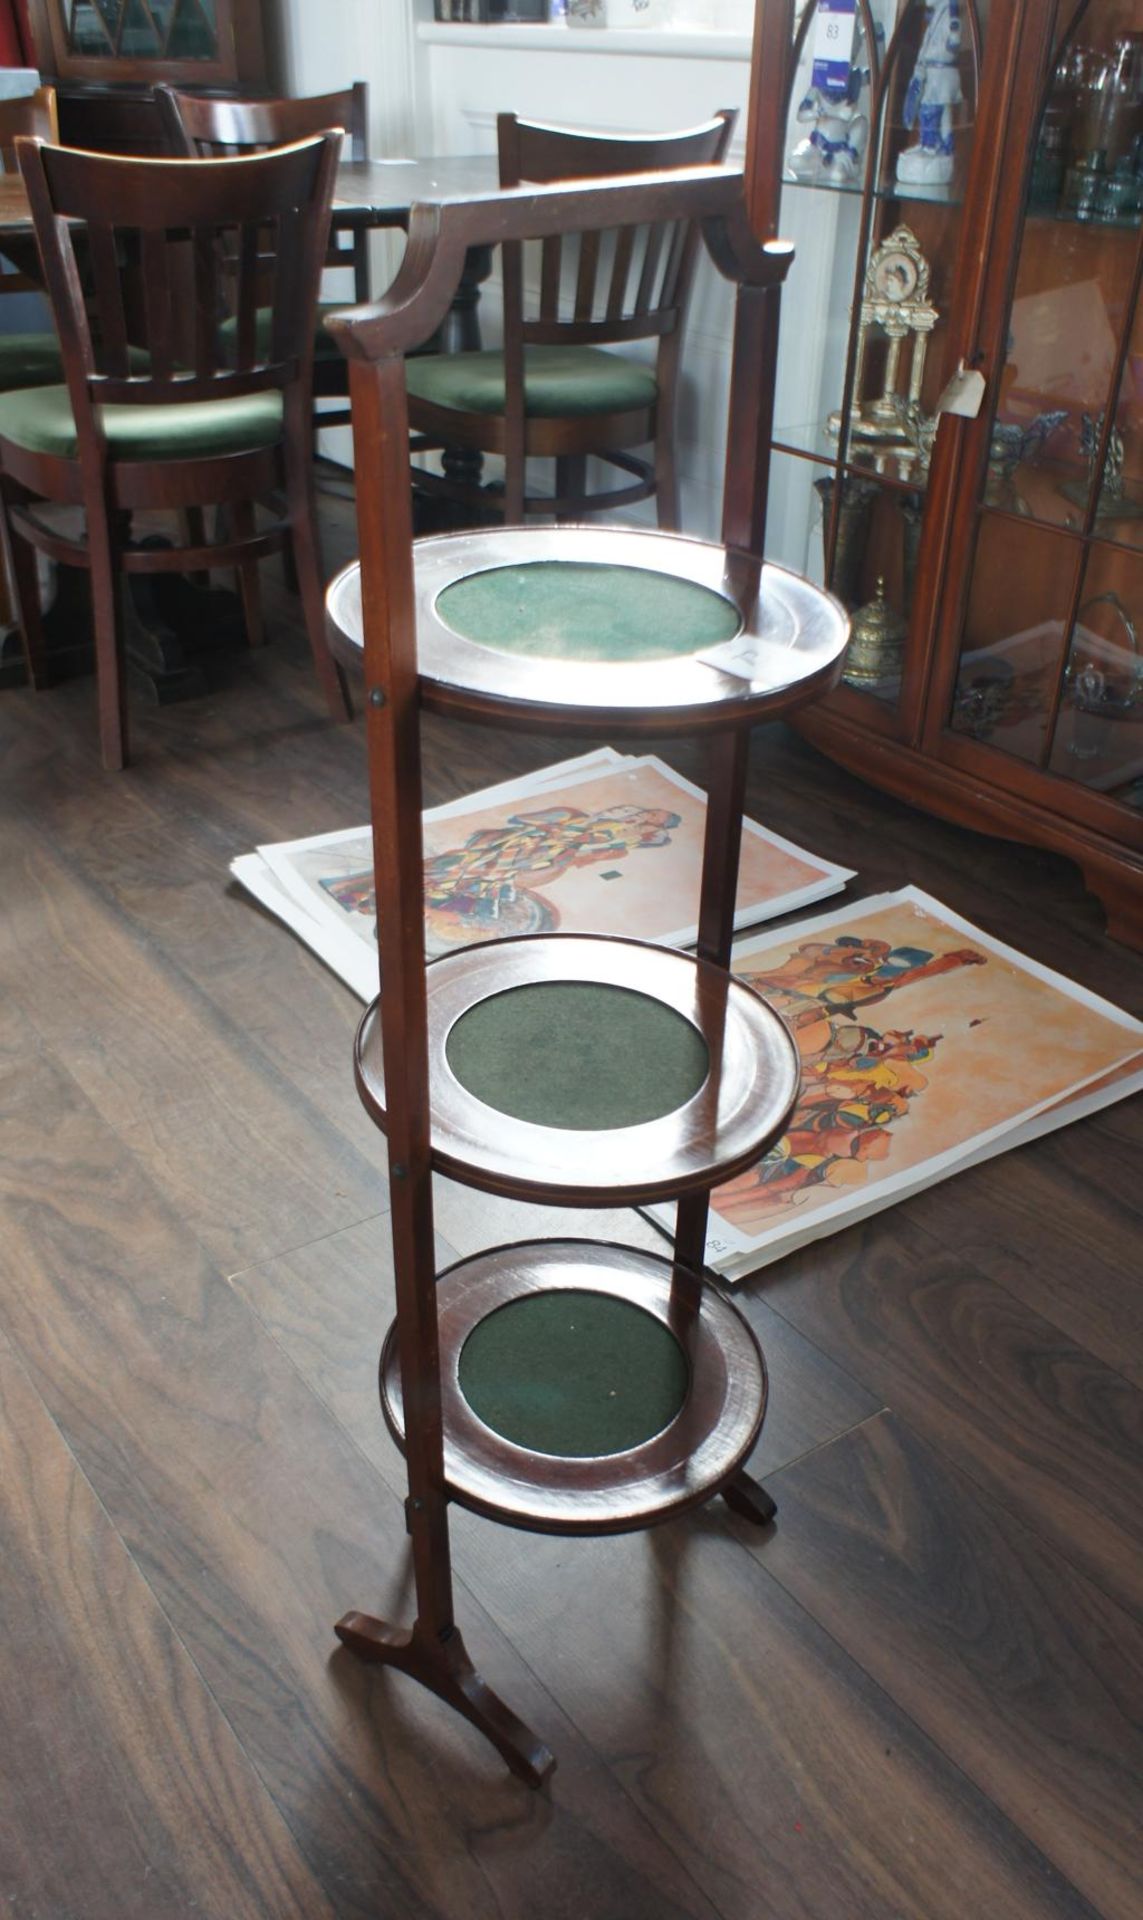 Oak Effect 3 Tier Plant Stand - Image 3 of 3